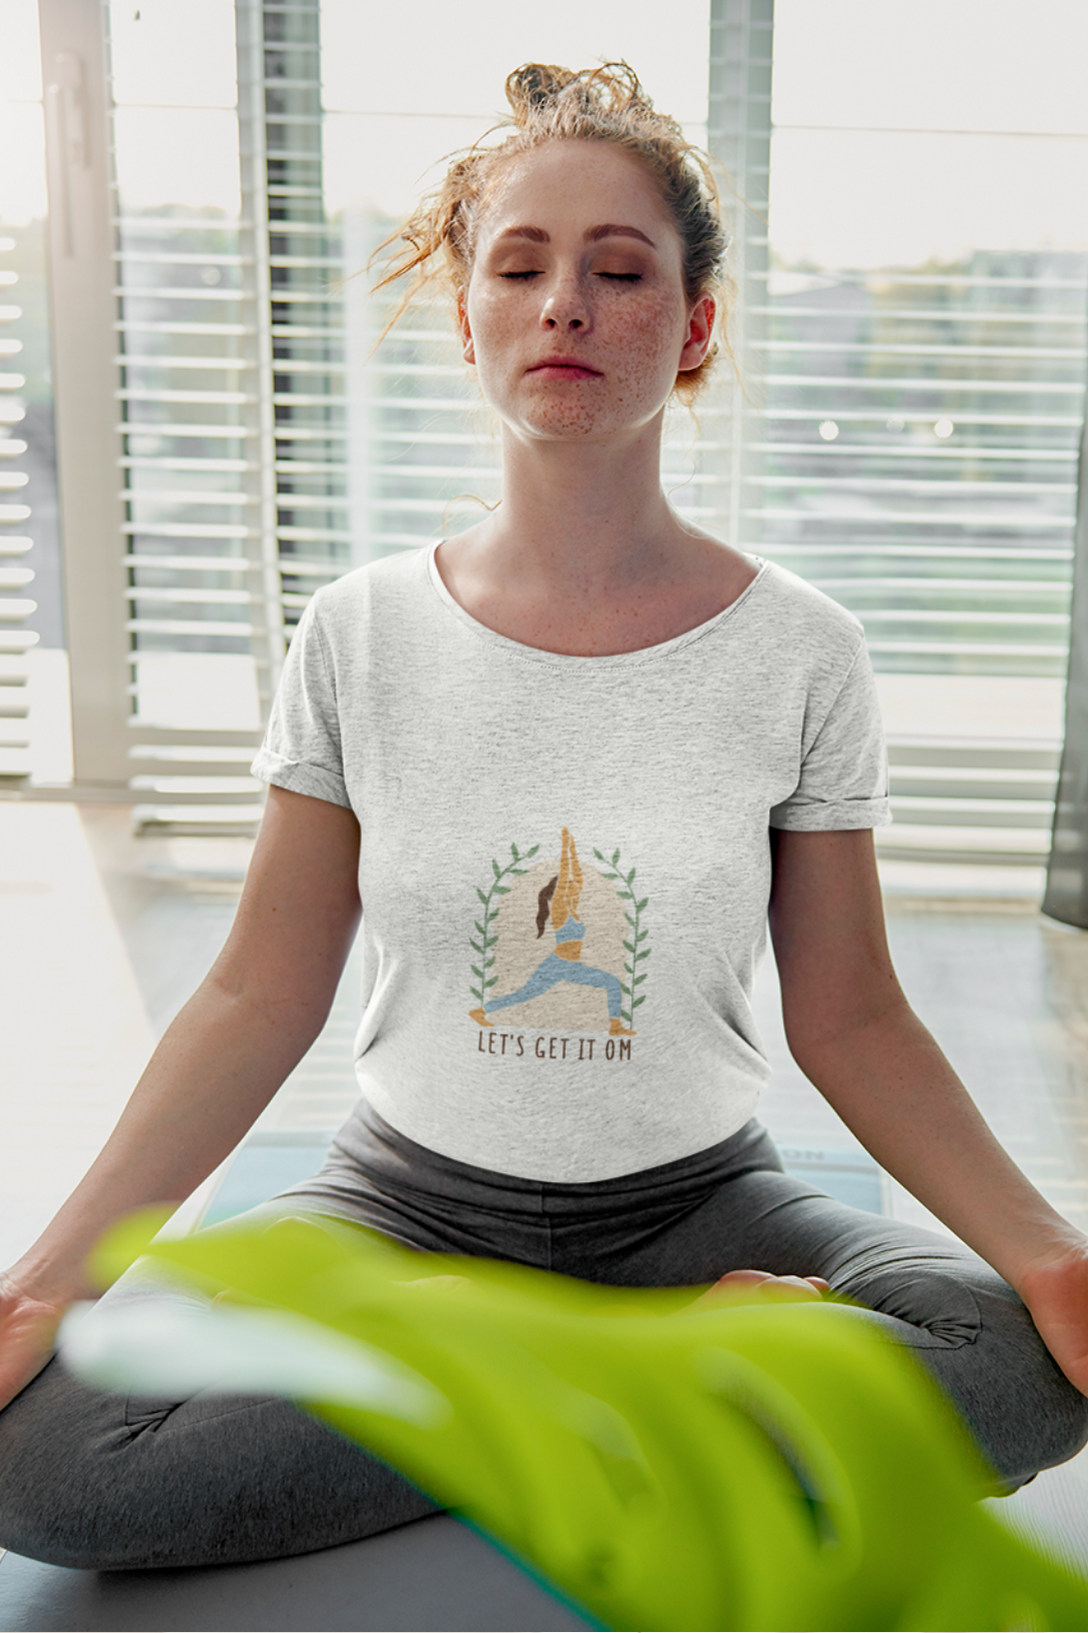 Yoga With Om Printed Scoop Neck T-Shirt For Women - WowWaves - 2